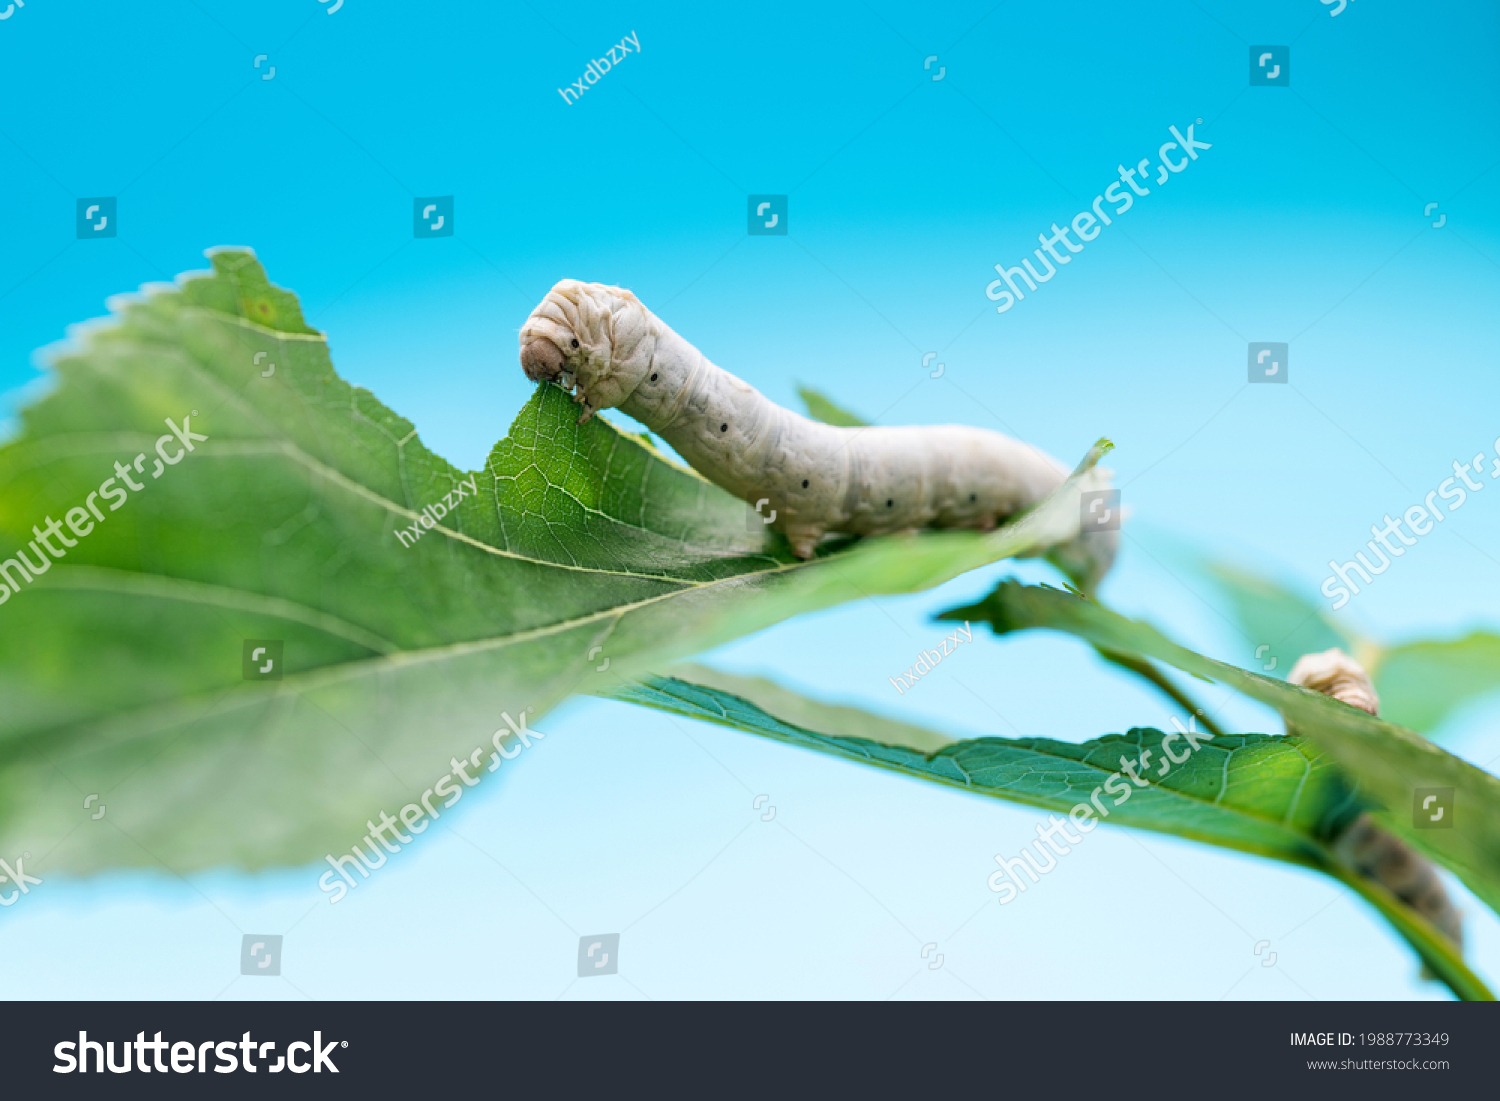 Two silkworms eating mulberry leaves. #1988773349